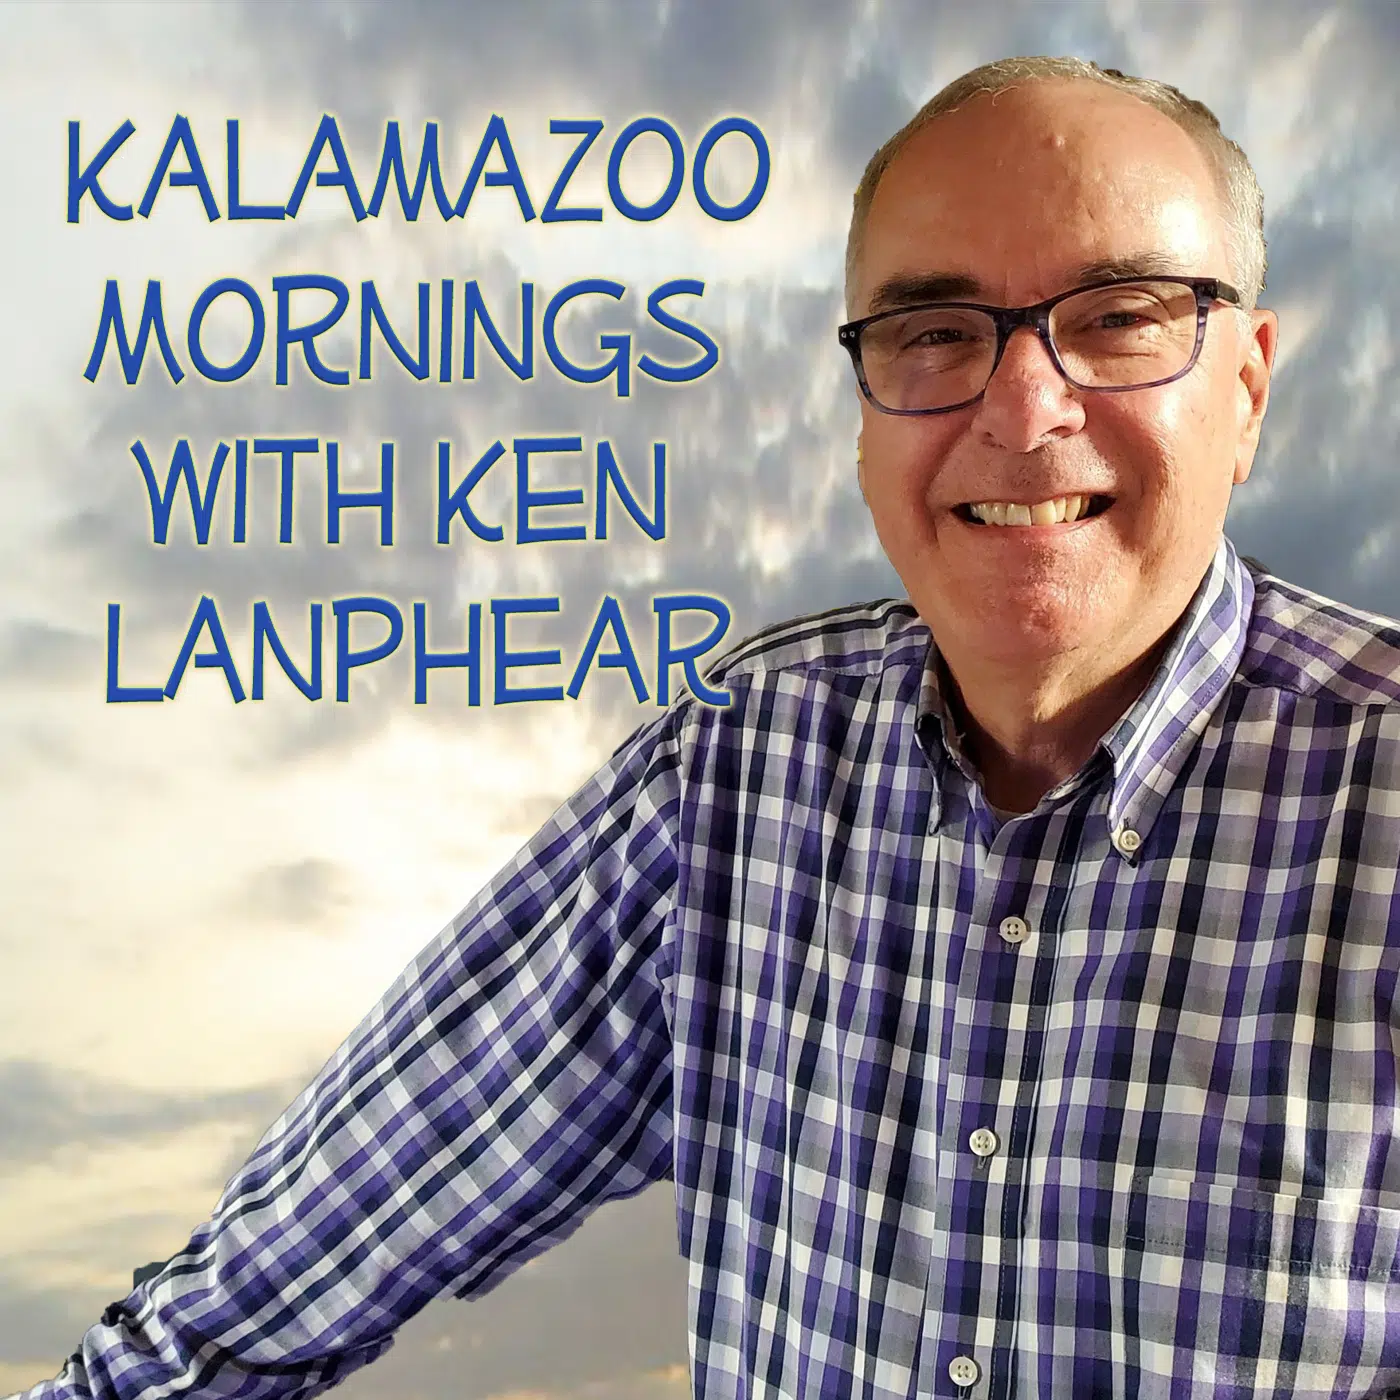 The Morning Show with Ken Lanphear